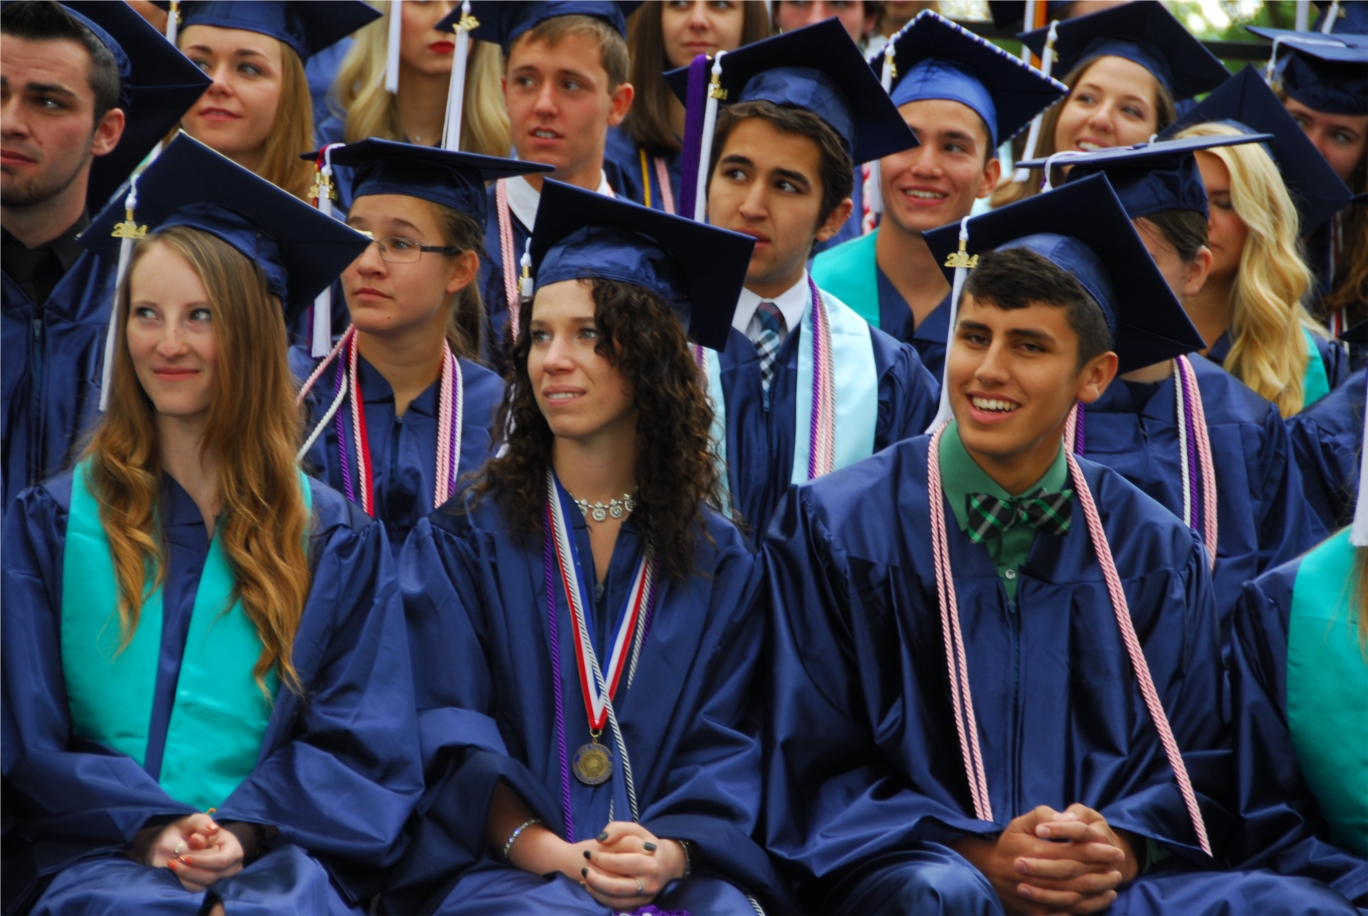 Bosque School's Class of 2014, with 74 graduates, was accepted to 402 colleges and universities. They accumulated a total of $1,321,077 in merit based scholarships, with an average merit scholarship of $17,850 per student.